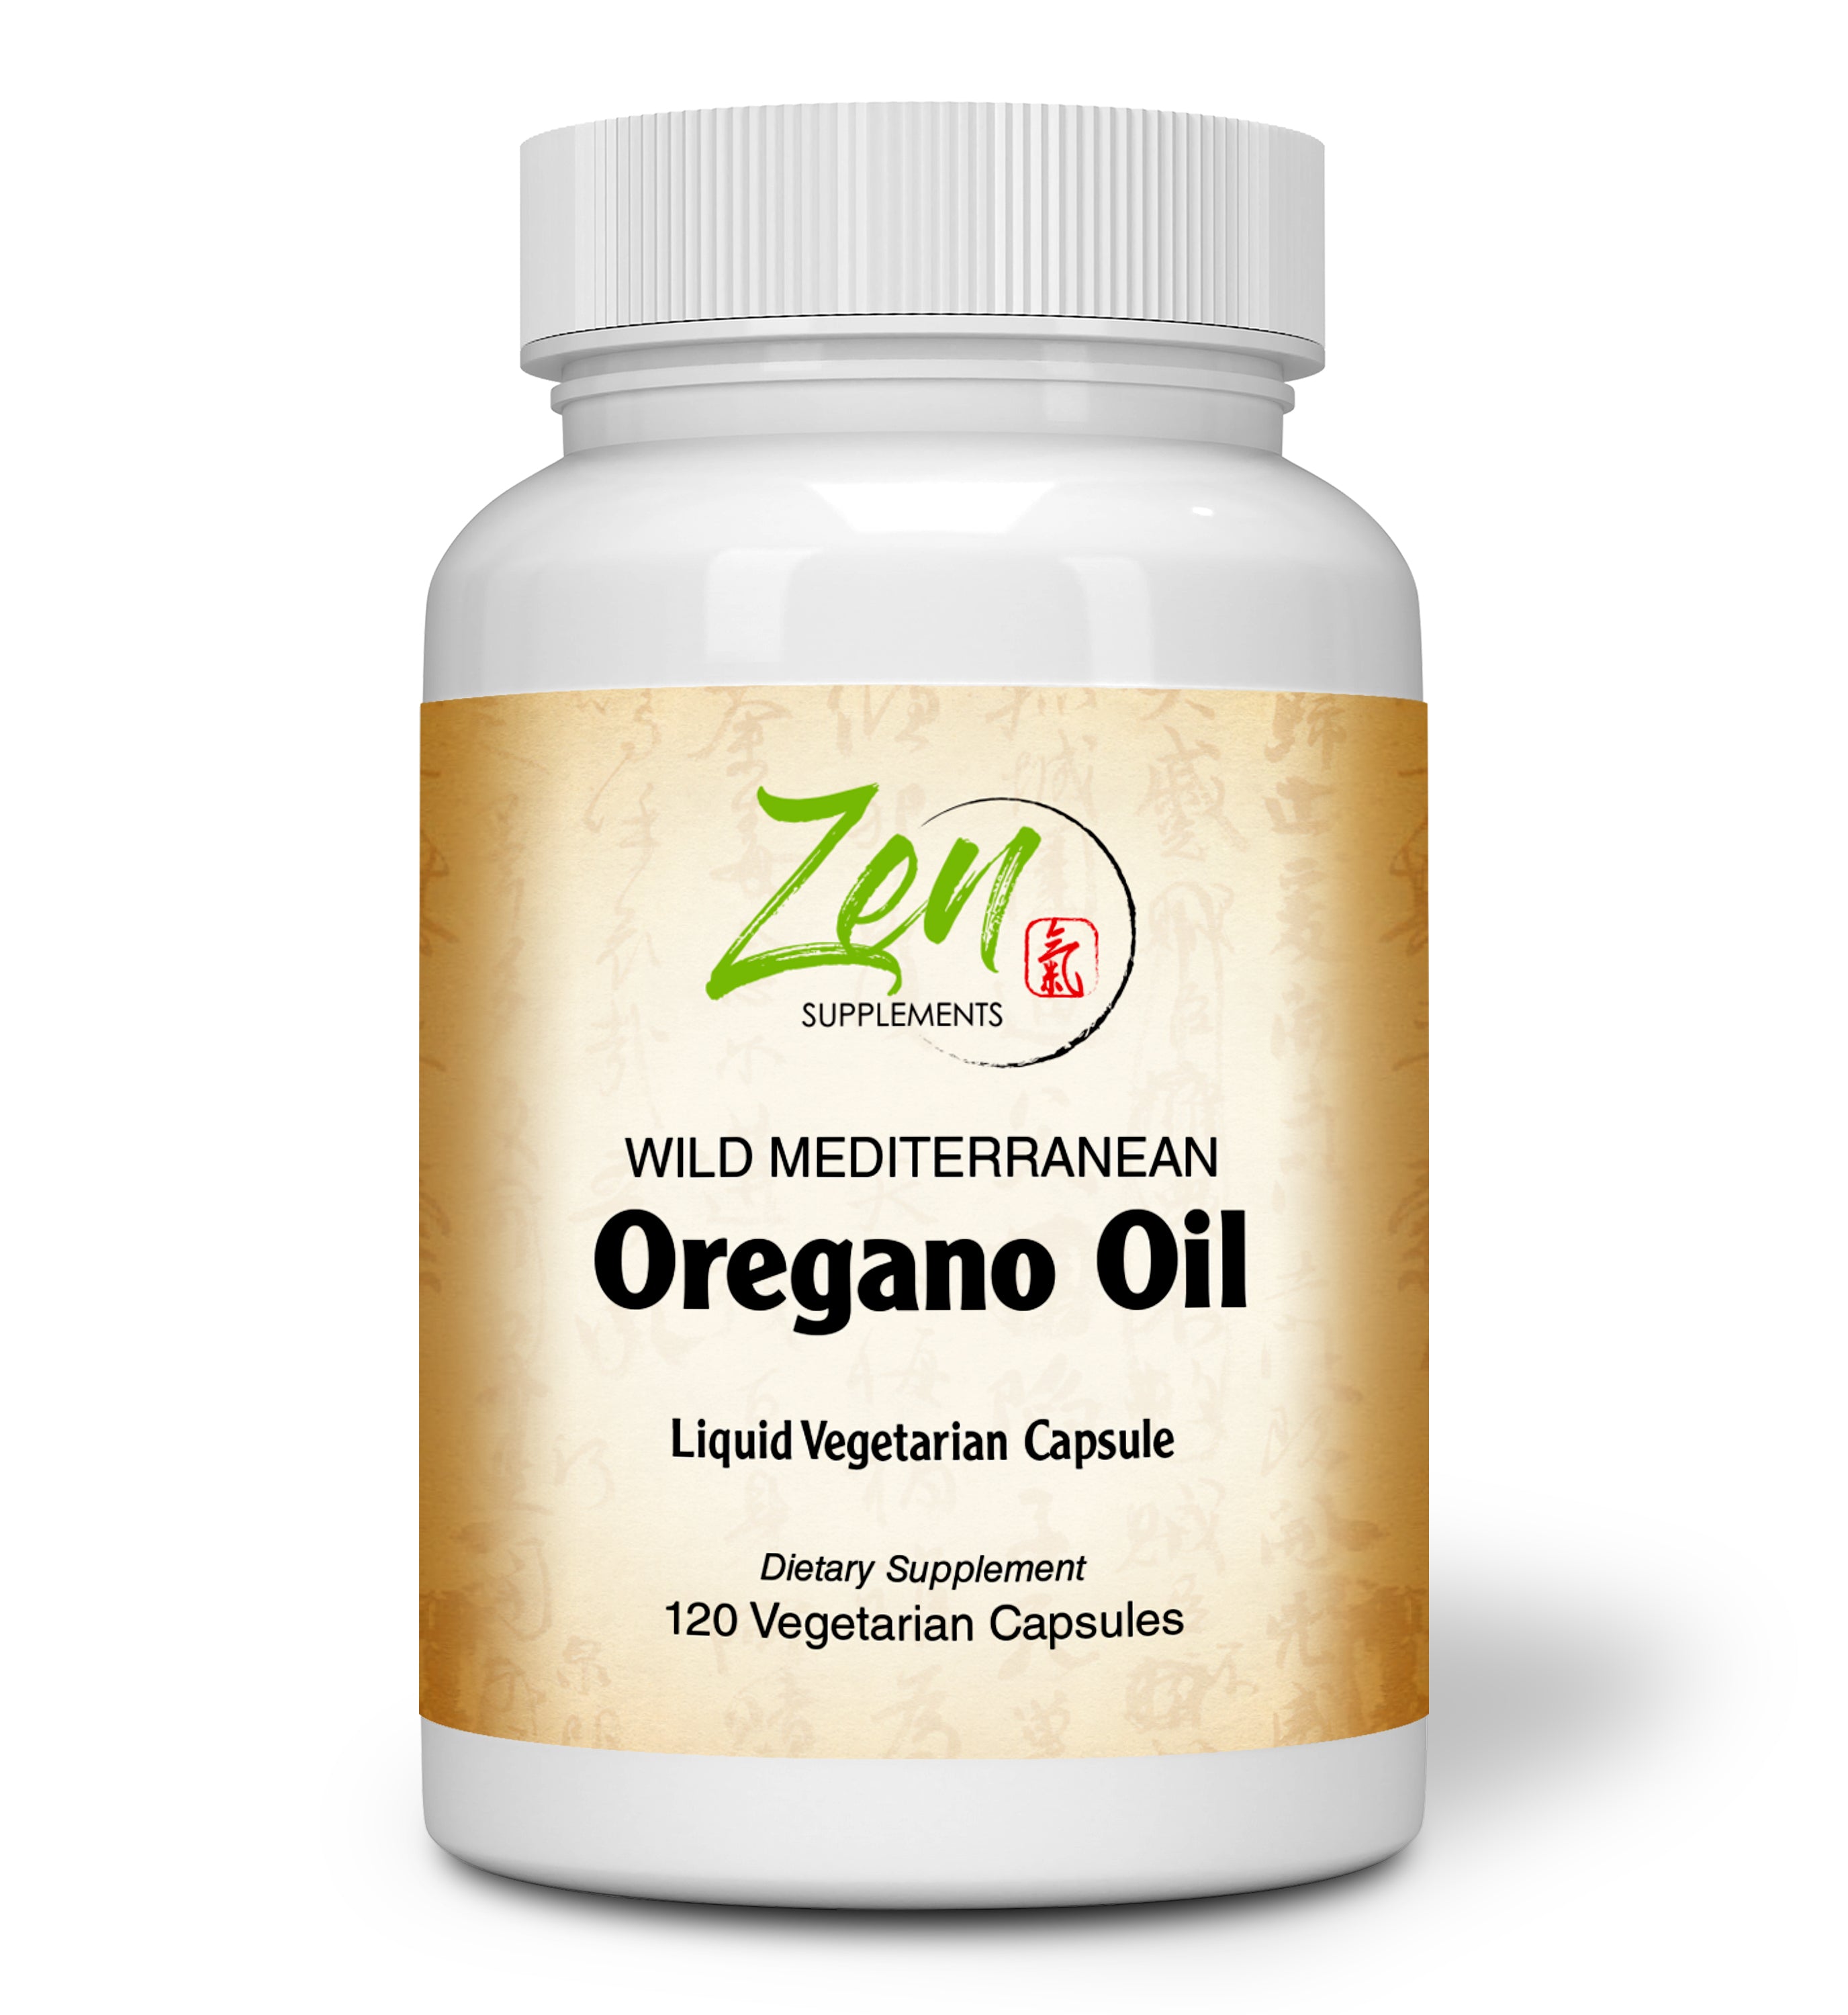 Zen Supplements - Oregano Oil Standardized to 45 Mg 70% Carvacrol - Immune and Intestinal Support for Healthy Digestive Flora 120-Vegcaps